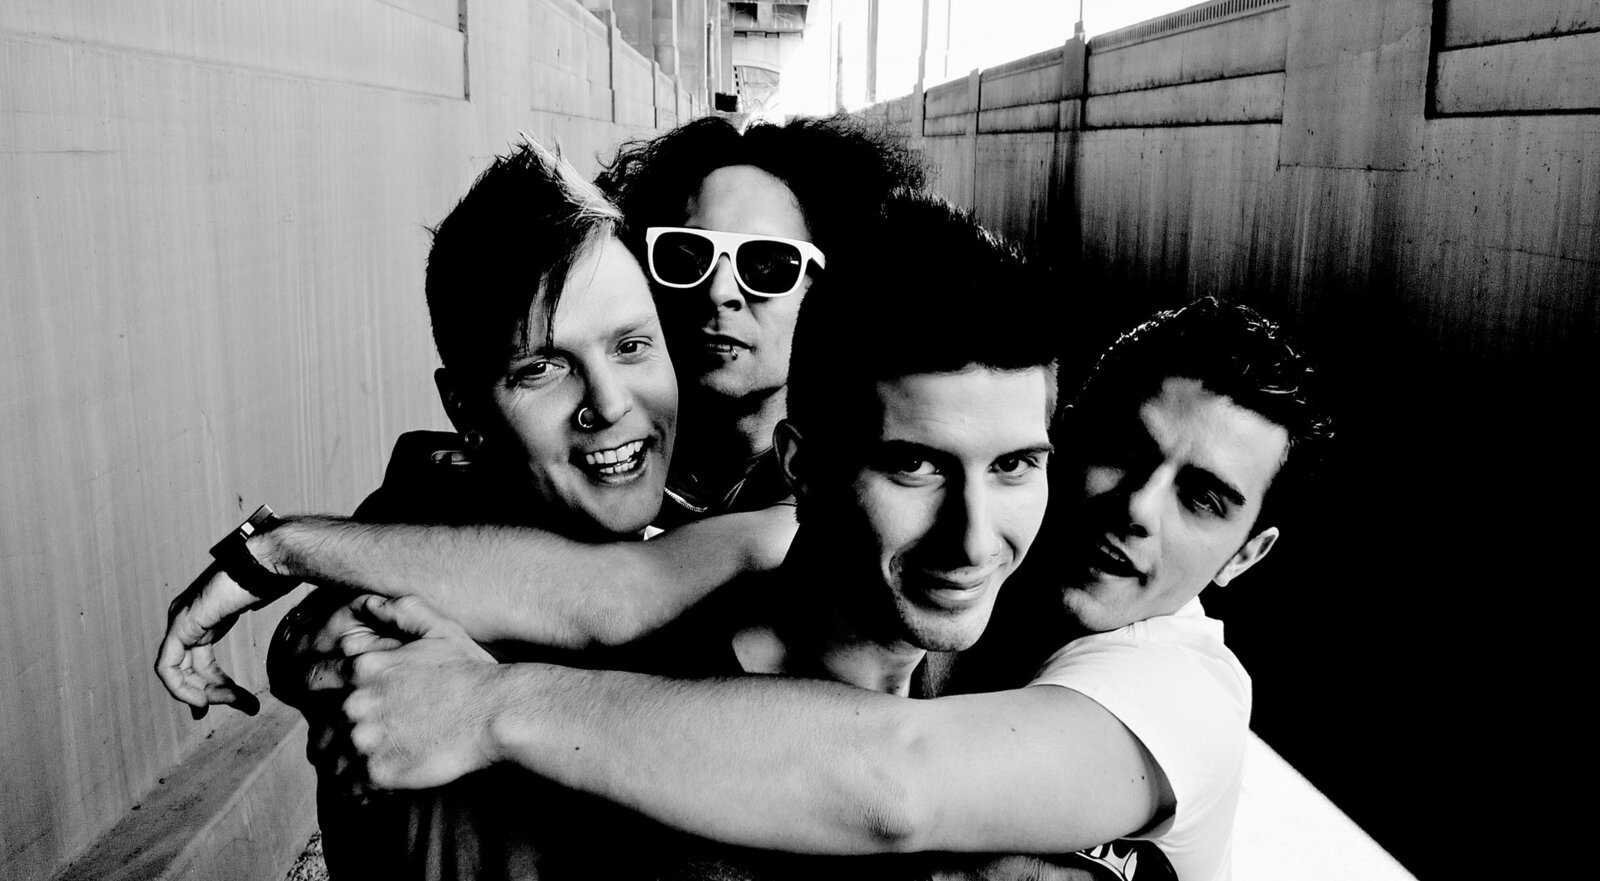 Band portrait Los Angeles Faber Drive group members arms wrapped around each other black and white